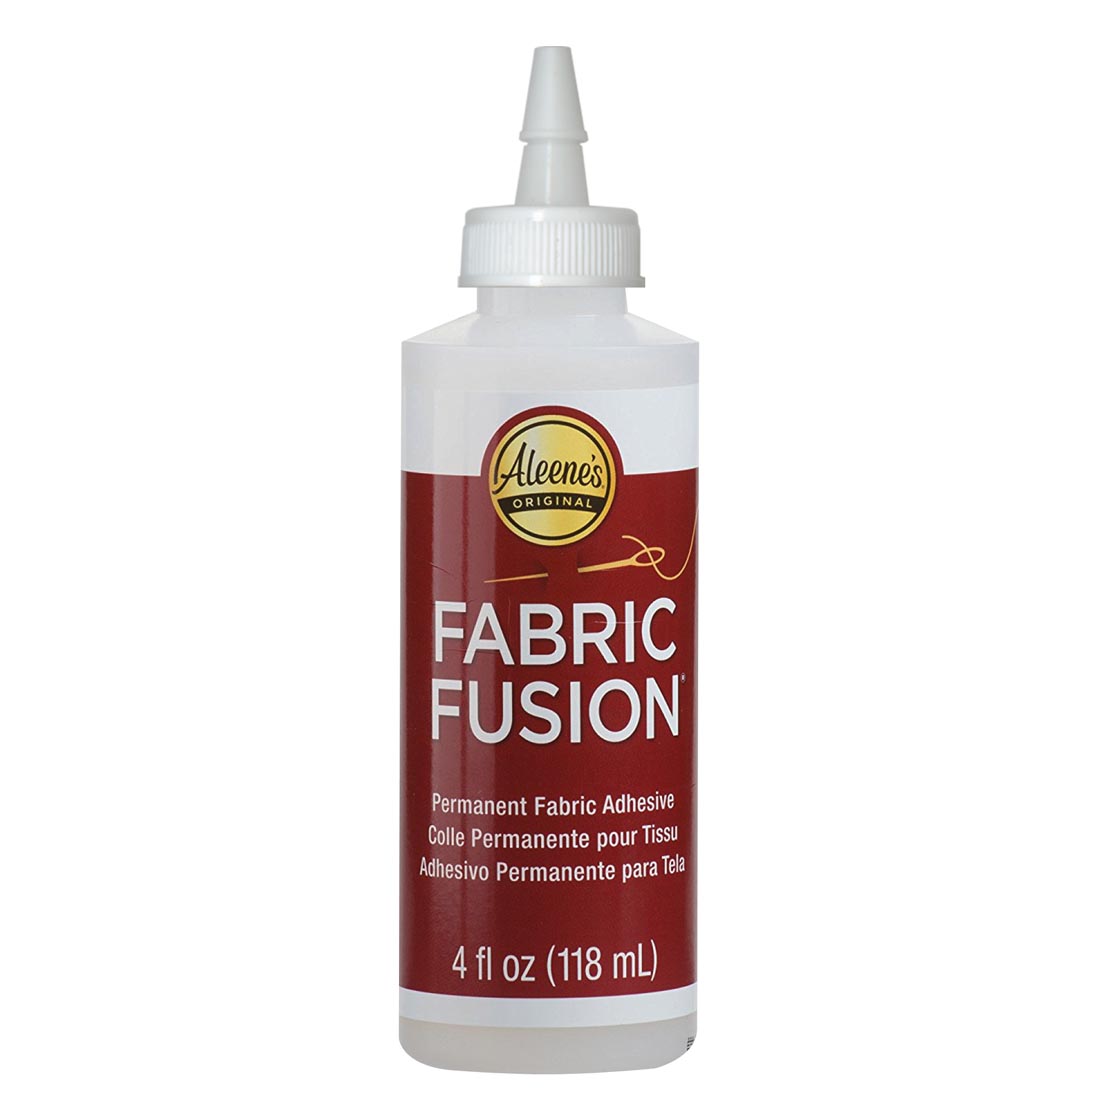 Aleene's Fabric Fusion Permanent Dry Cleanable Fabric Adhesive